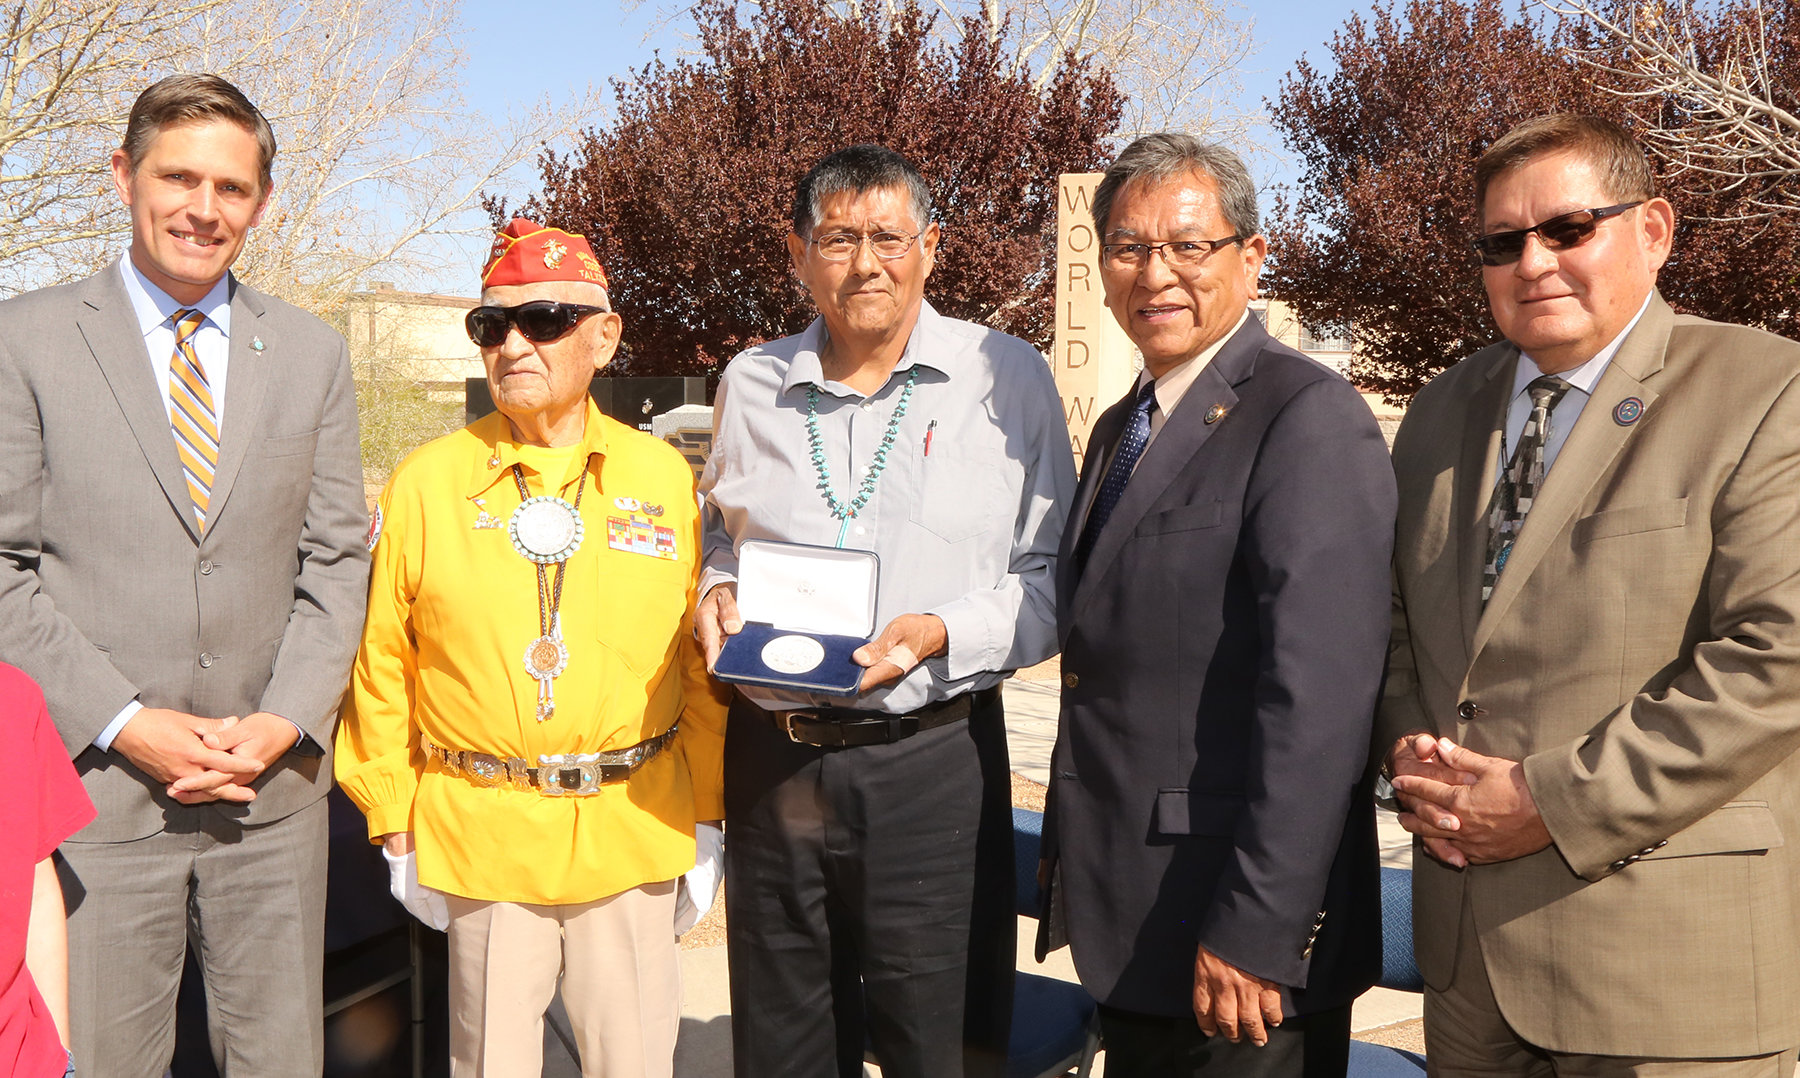 who were the navajo code talkers and why were the navajo code talkers important during world war ii